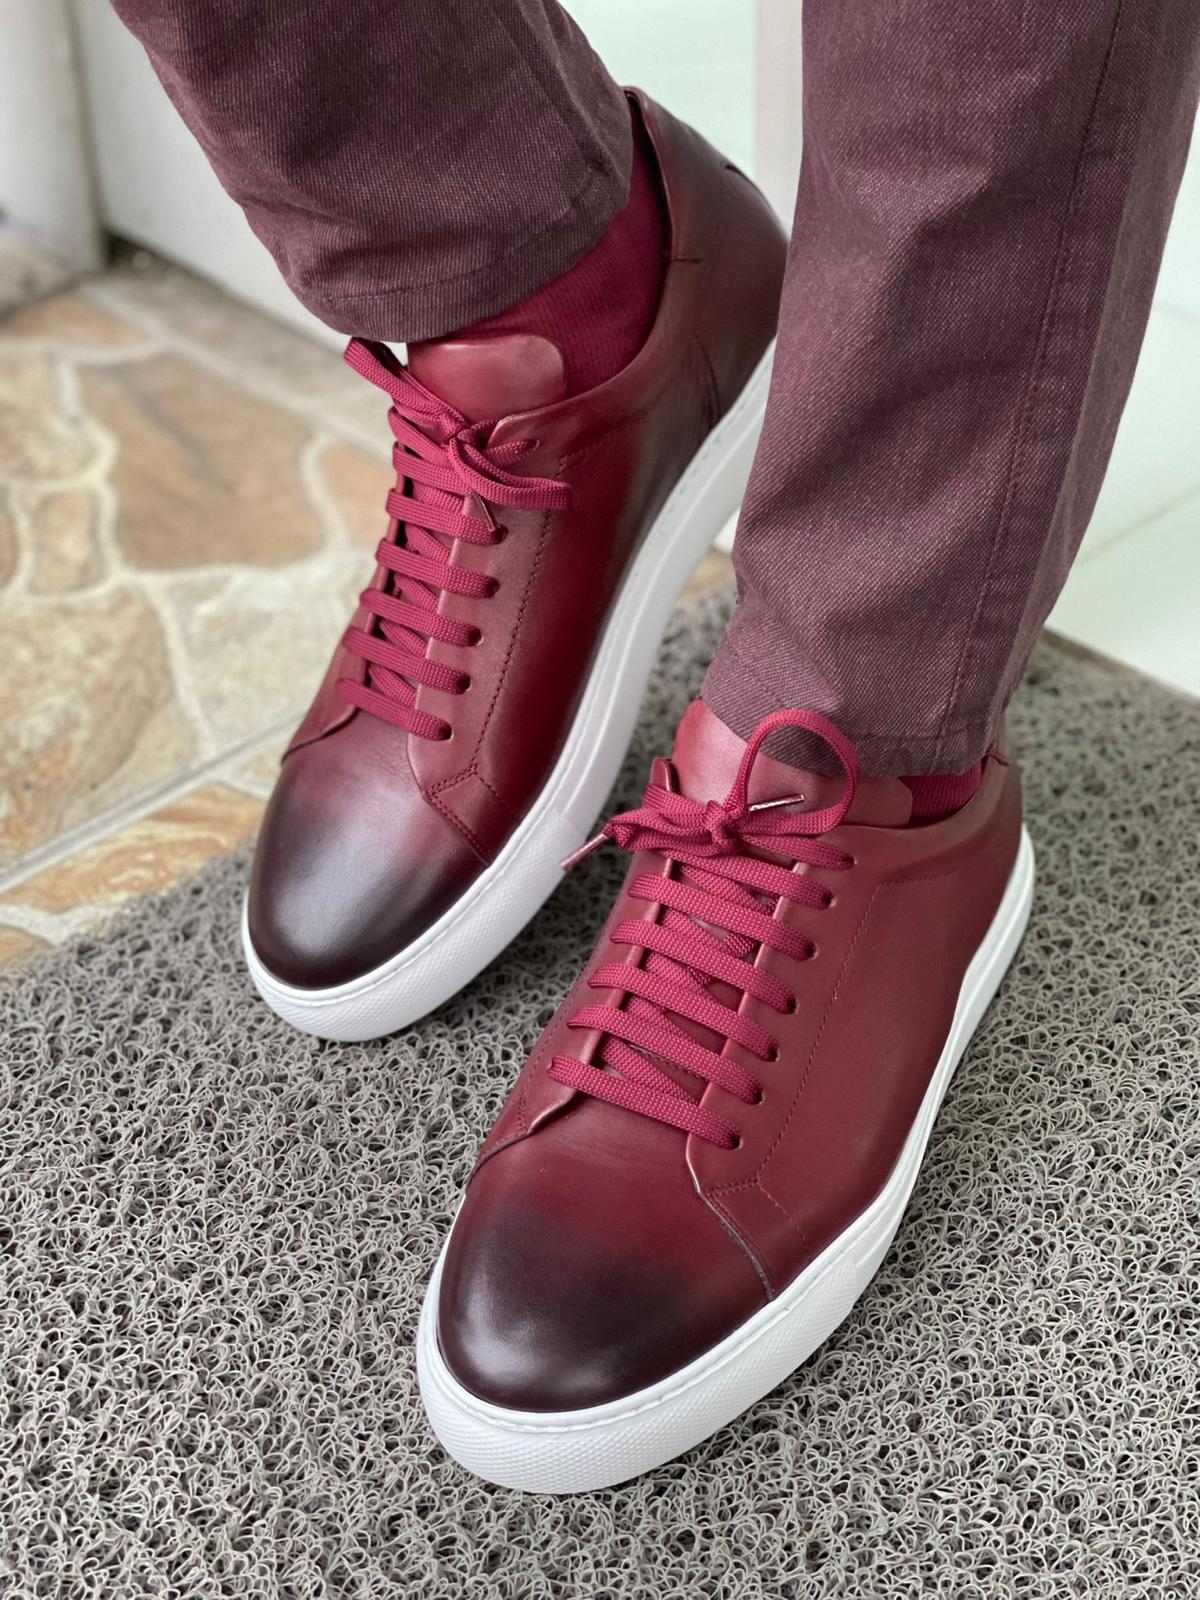 Details more than 219 red leather sneakers mens super hot